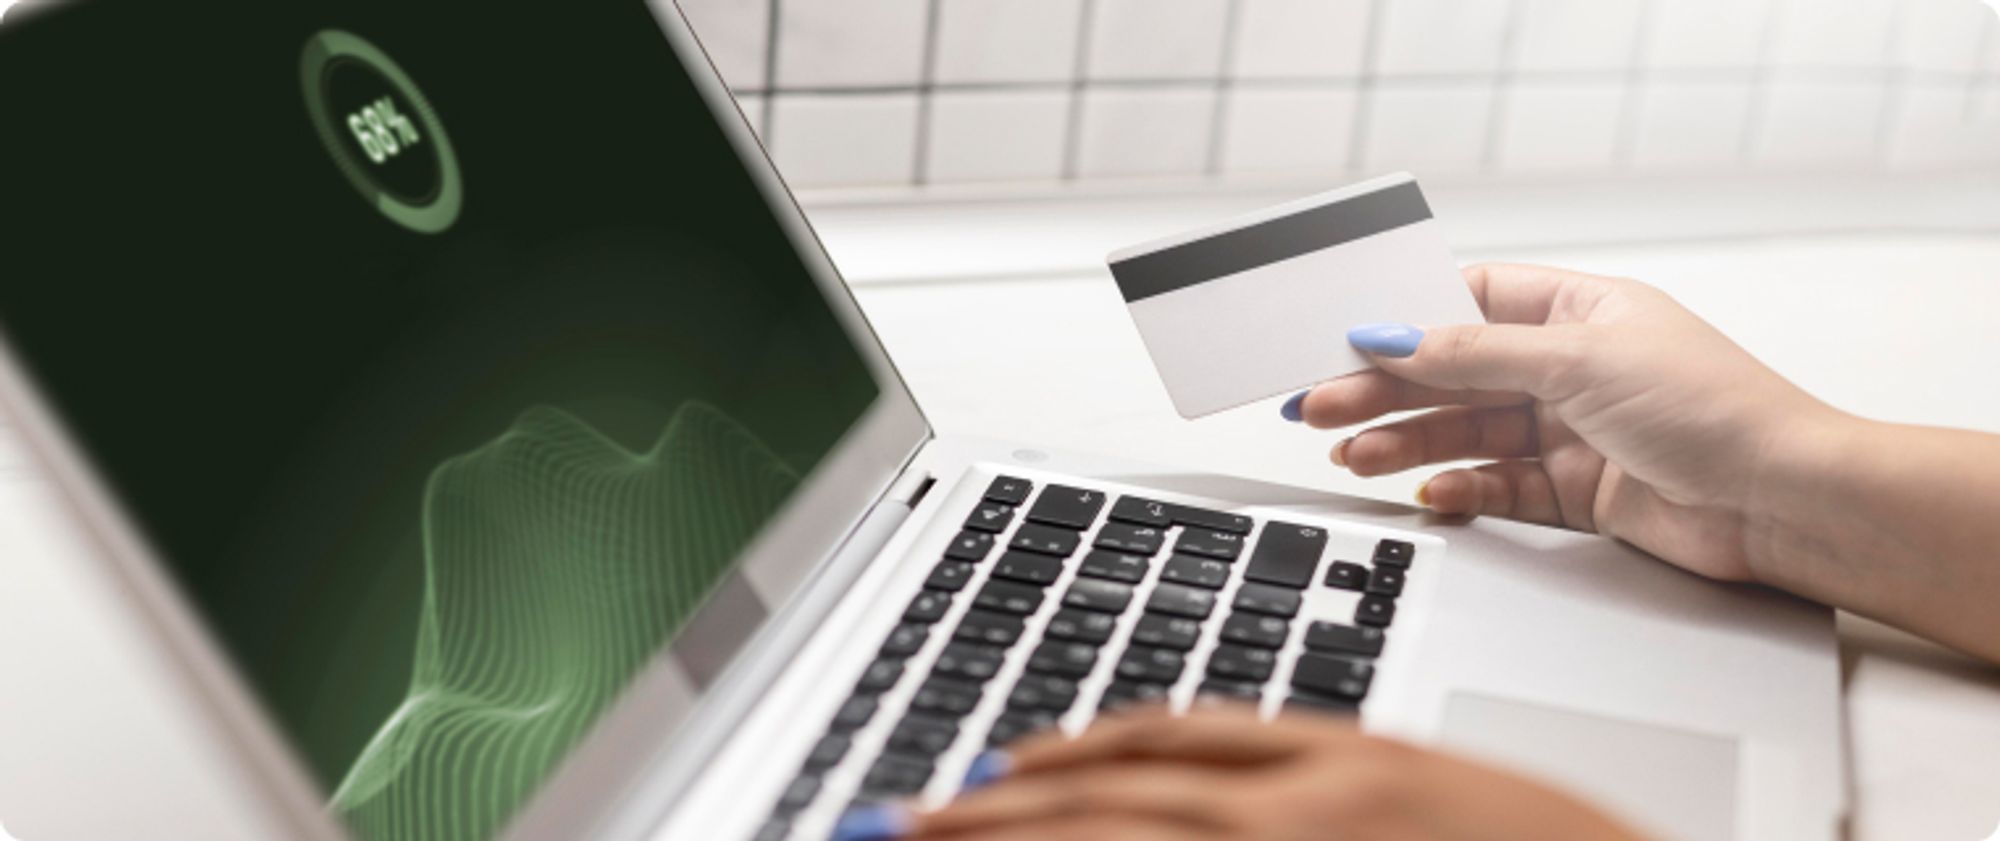 Online shopping payment security